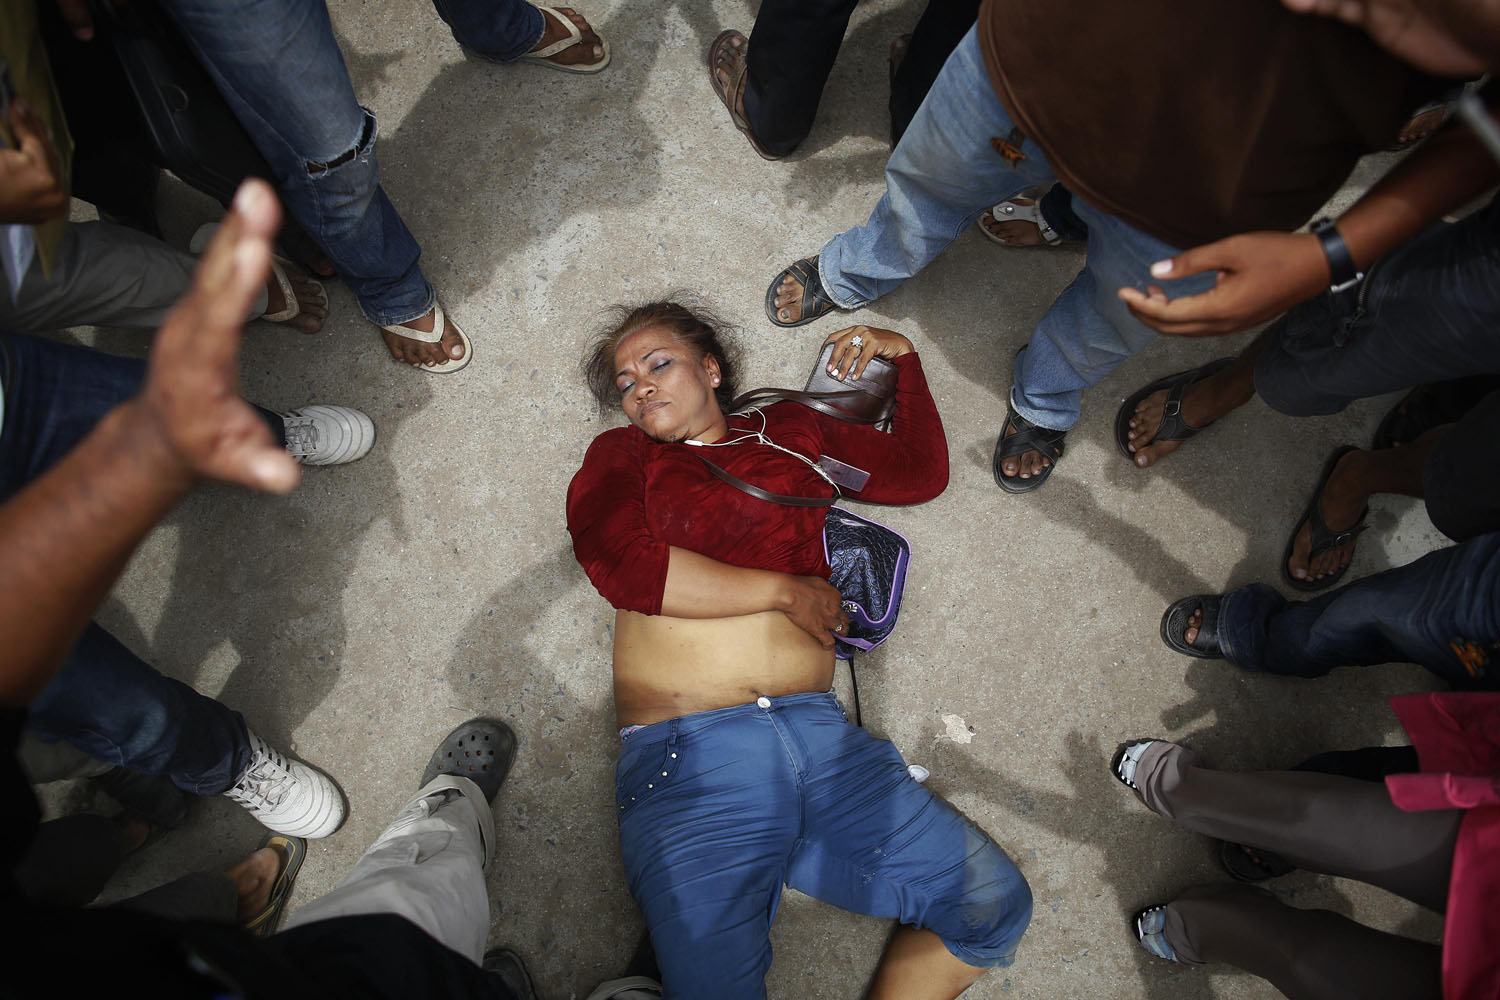 July 28, 2013. An election committee official lies unconscious after an angry mob surrounded her in a protest against alleged election irregularities at a polling station in Phnom Penh, Cambodia.